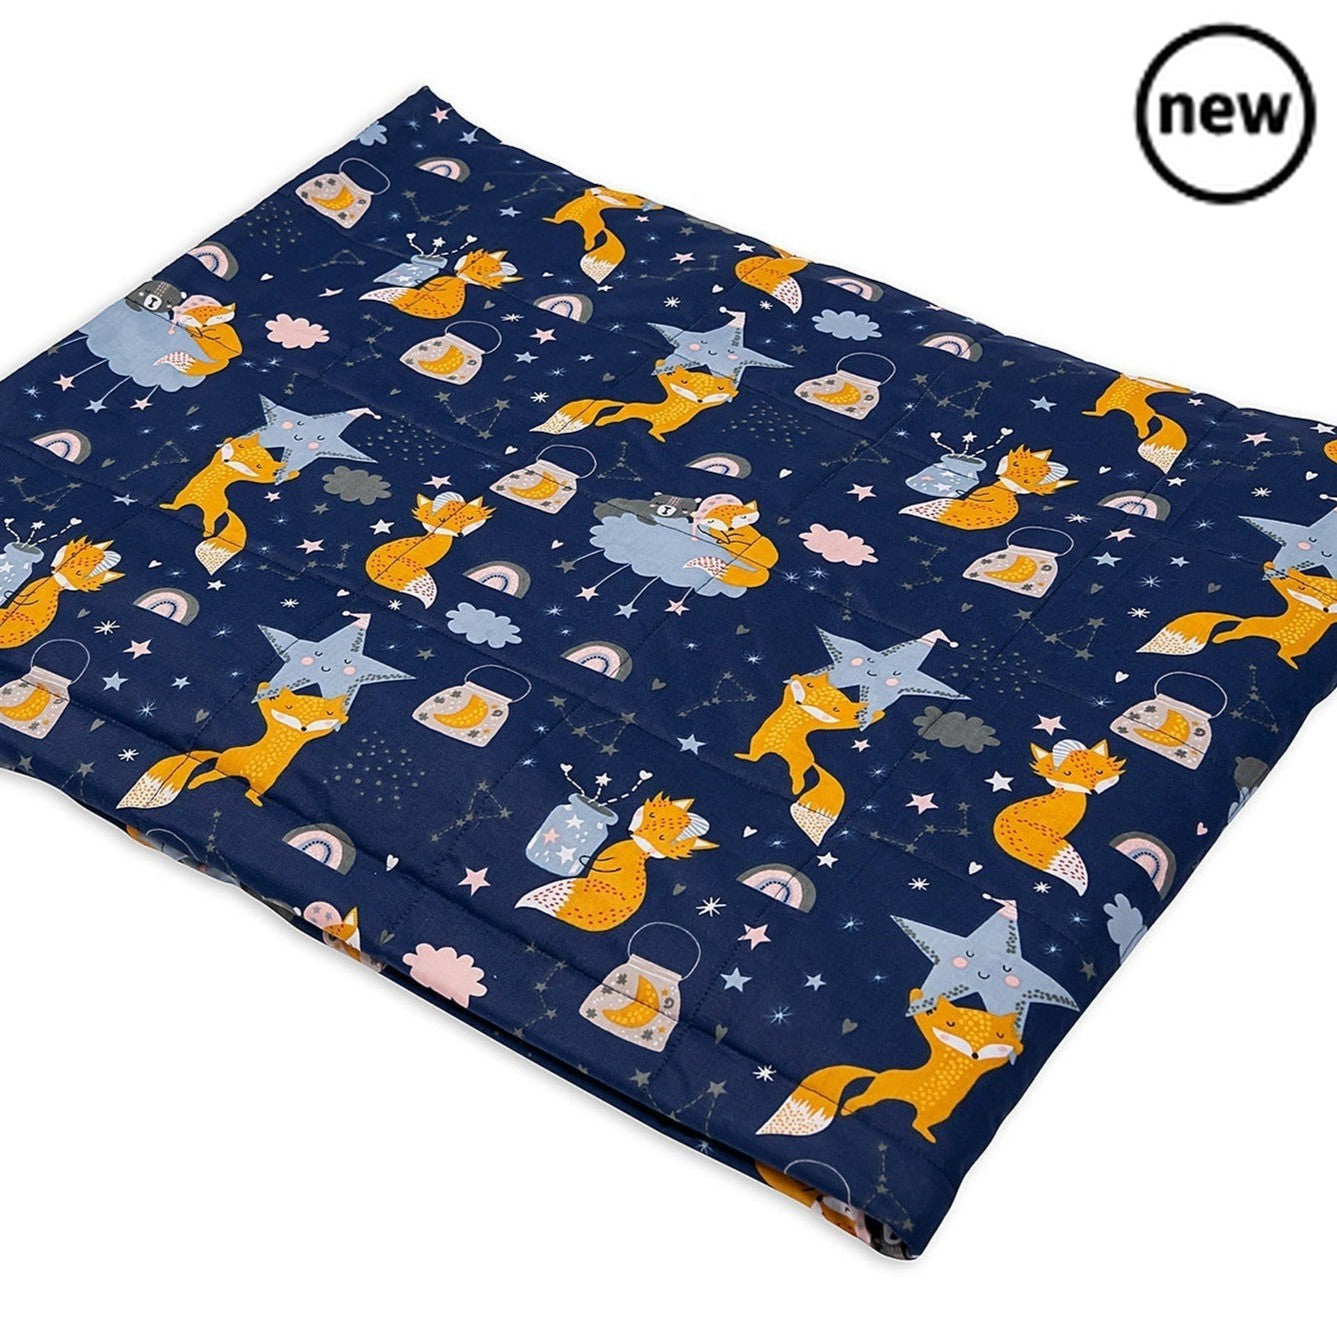 Sleeping Foxes Cotton Weighted Blanket, Introducing our Sleeping Foxes Cotton Weighted Blanket – a cozy haven of comfort entirely crafted for your individual preferences. Handmade from start to finish, this 100% cotton weighted blanket features delightful sleeping foxes, offering a personalized touch that caters to all age groups. Key Features: Handmade Excellence: Immerse yourself in the enchanting world of sleeping foxes with our entirely handmade weighted blanket. Customize every detail, from backing fab